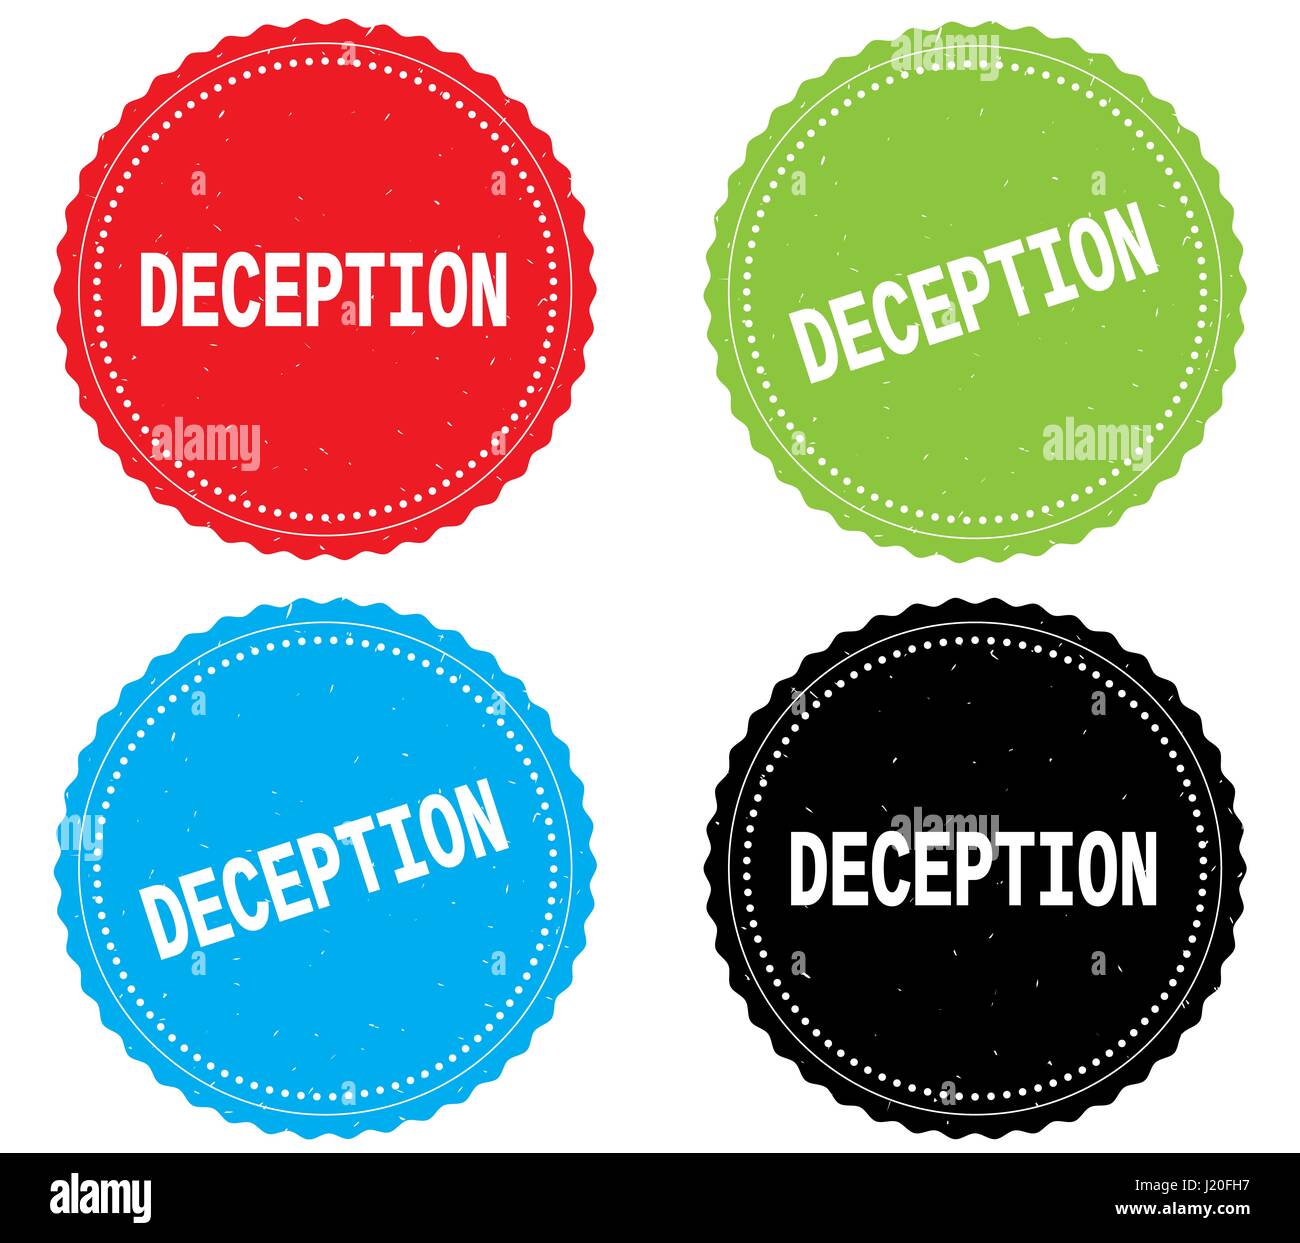 DECEPTION text, on round wavy border stamp badge, in color set. Stock Photo